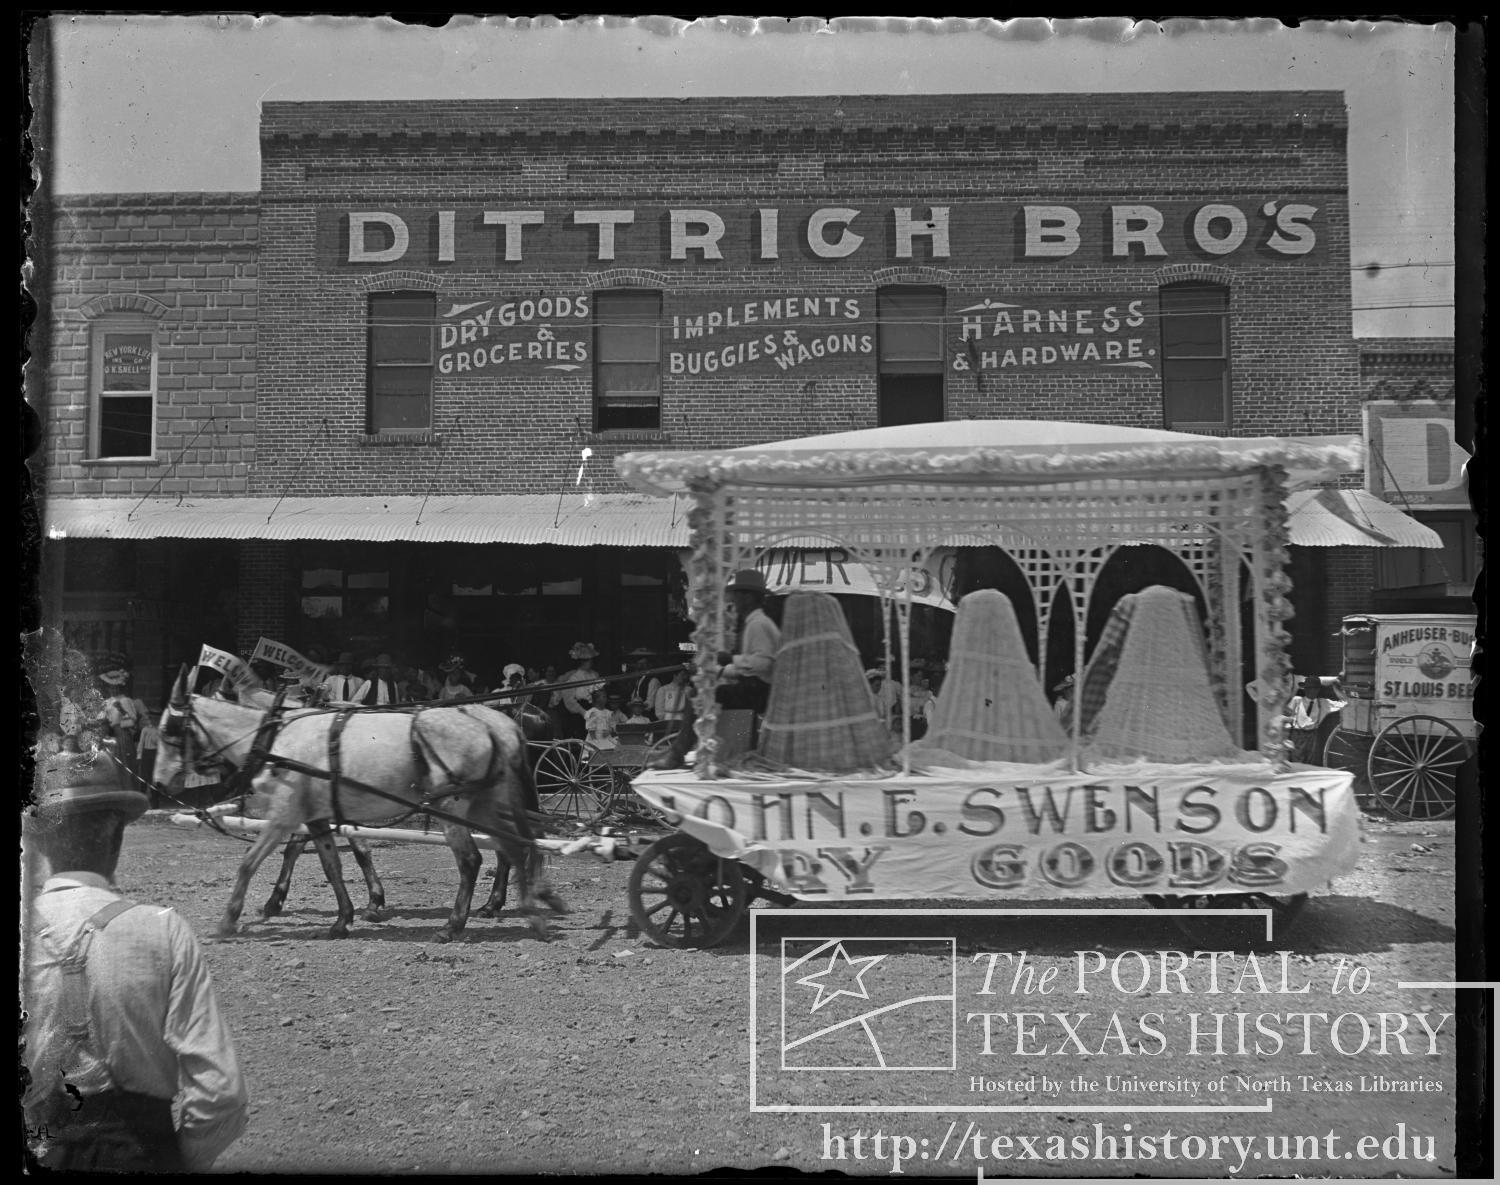 Parade Float: John E. Swenson, Dry Goods
                                                
                                                    [Sequence #]: 1 of 1
                                                